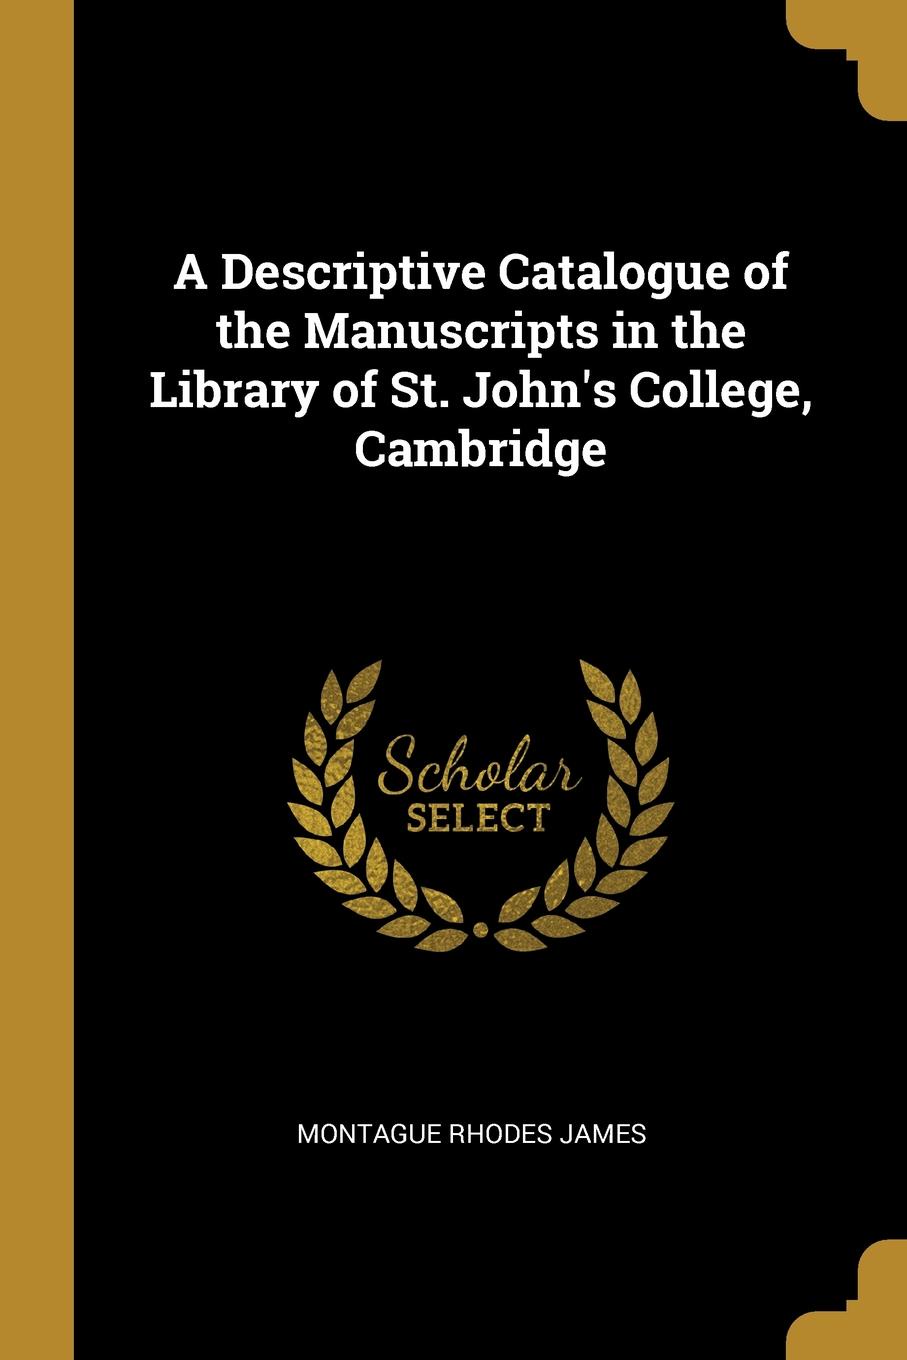 A Descriptive Catalogue of the Manuscripts in the Library of St. John.s College, Cambridge